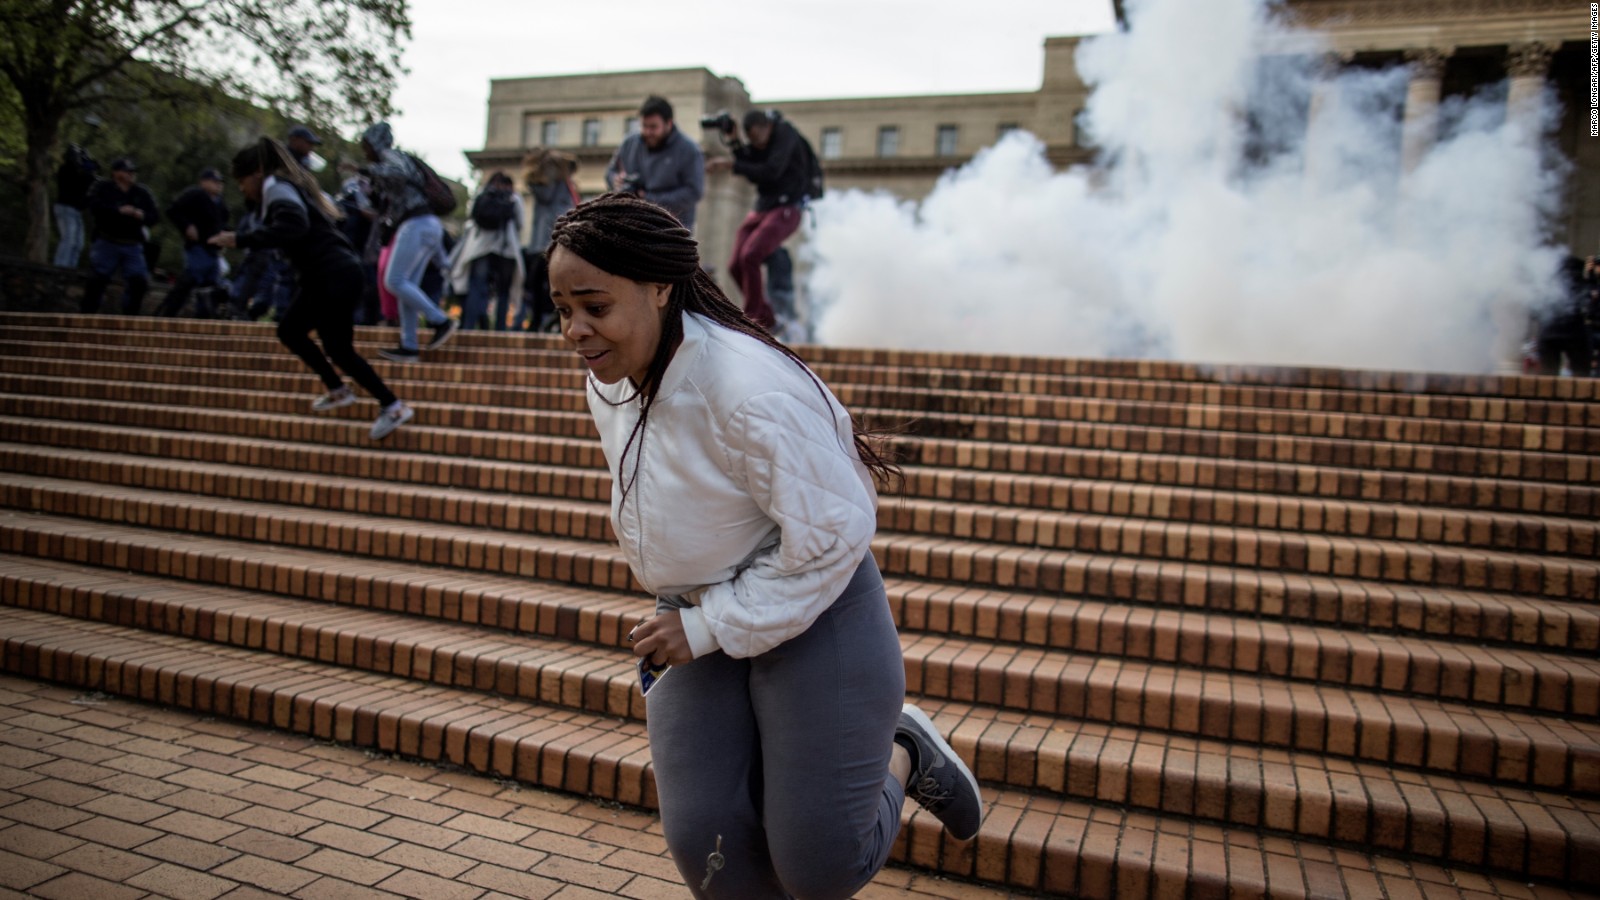 Violence erupts at South Africa student protest CNN